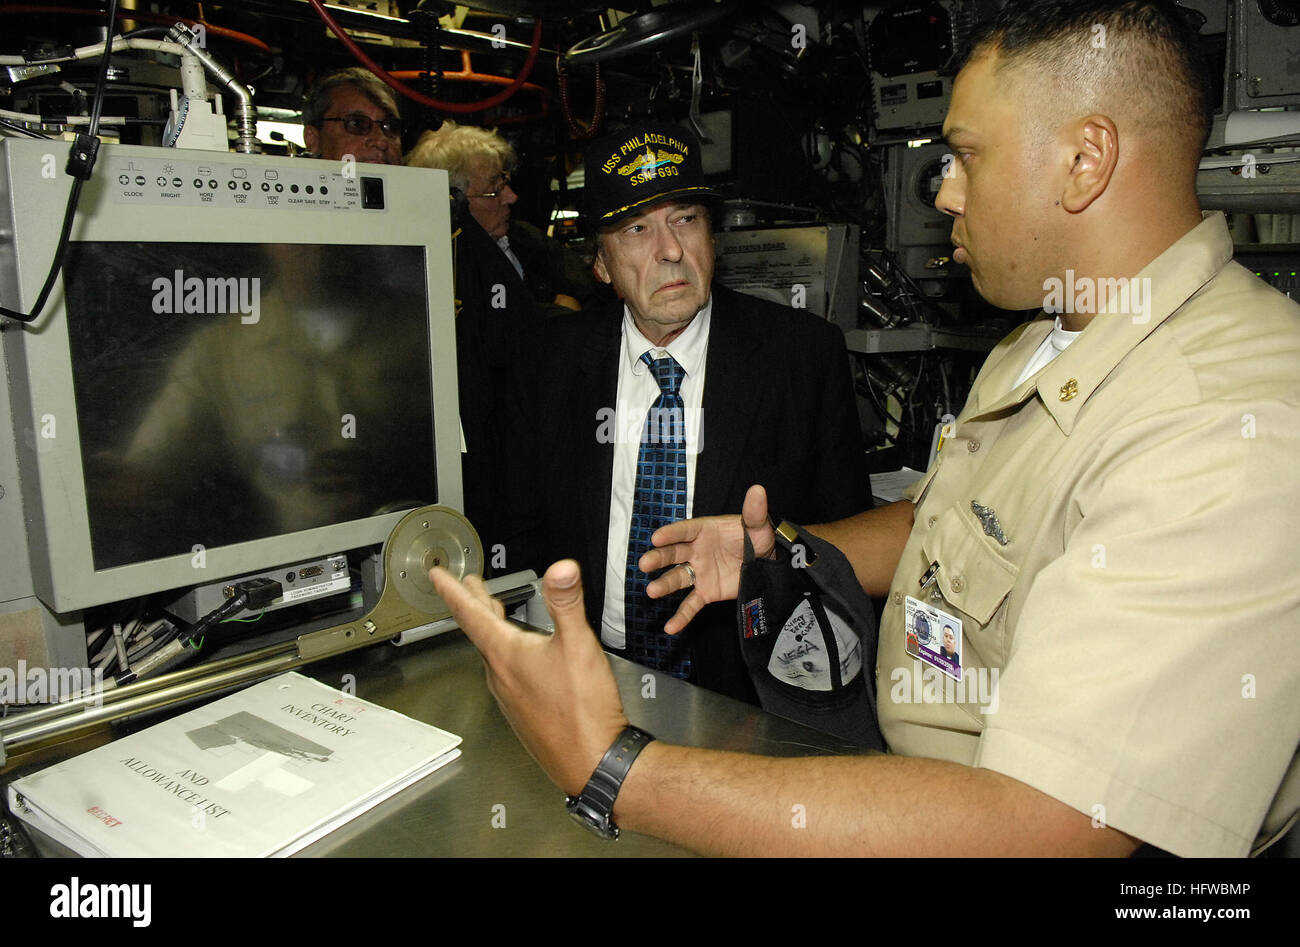 080806-N-8467N-001 GROTON, Conn. (Aug. 6, 2008) Chief Fire Control Technician Jason Vega Cruz talks about nagivation aboard the fast-attack submarine USS Philadelphia (SSN 690) to actor and Army Veteran Rip Torn. The 77-year-old Torn visited Philadelphia while on a tour to Submarine Base New London. (U.S. Navy photo by John Narewski/Released) US Navy 080806-N-8467N-001 Chief Fire Control Technician Jason Vega Cruz talks about nagivation aboard the fast-attack submarine USS Philadelphia (SSN 690) to actor and Army Veteran Rip Torn Stock Photo